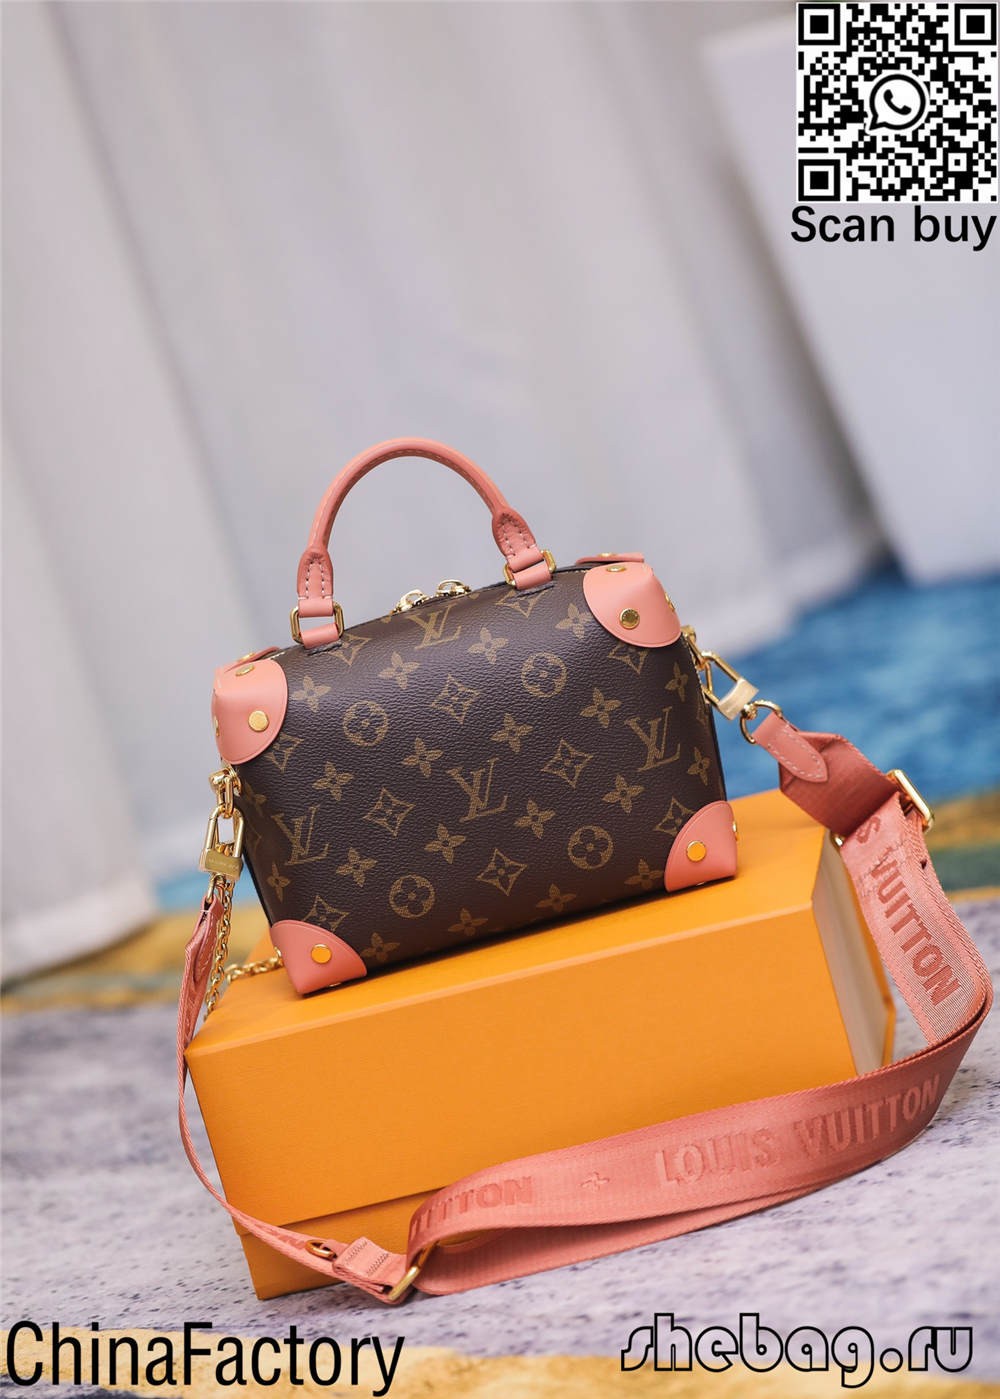 Bags replica high quality LV luggage bag online shopping (2022 updated)-Best Quality Fake Louis Vuitton Bag Online Store, Replica designer bag ru